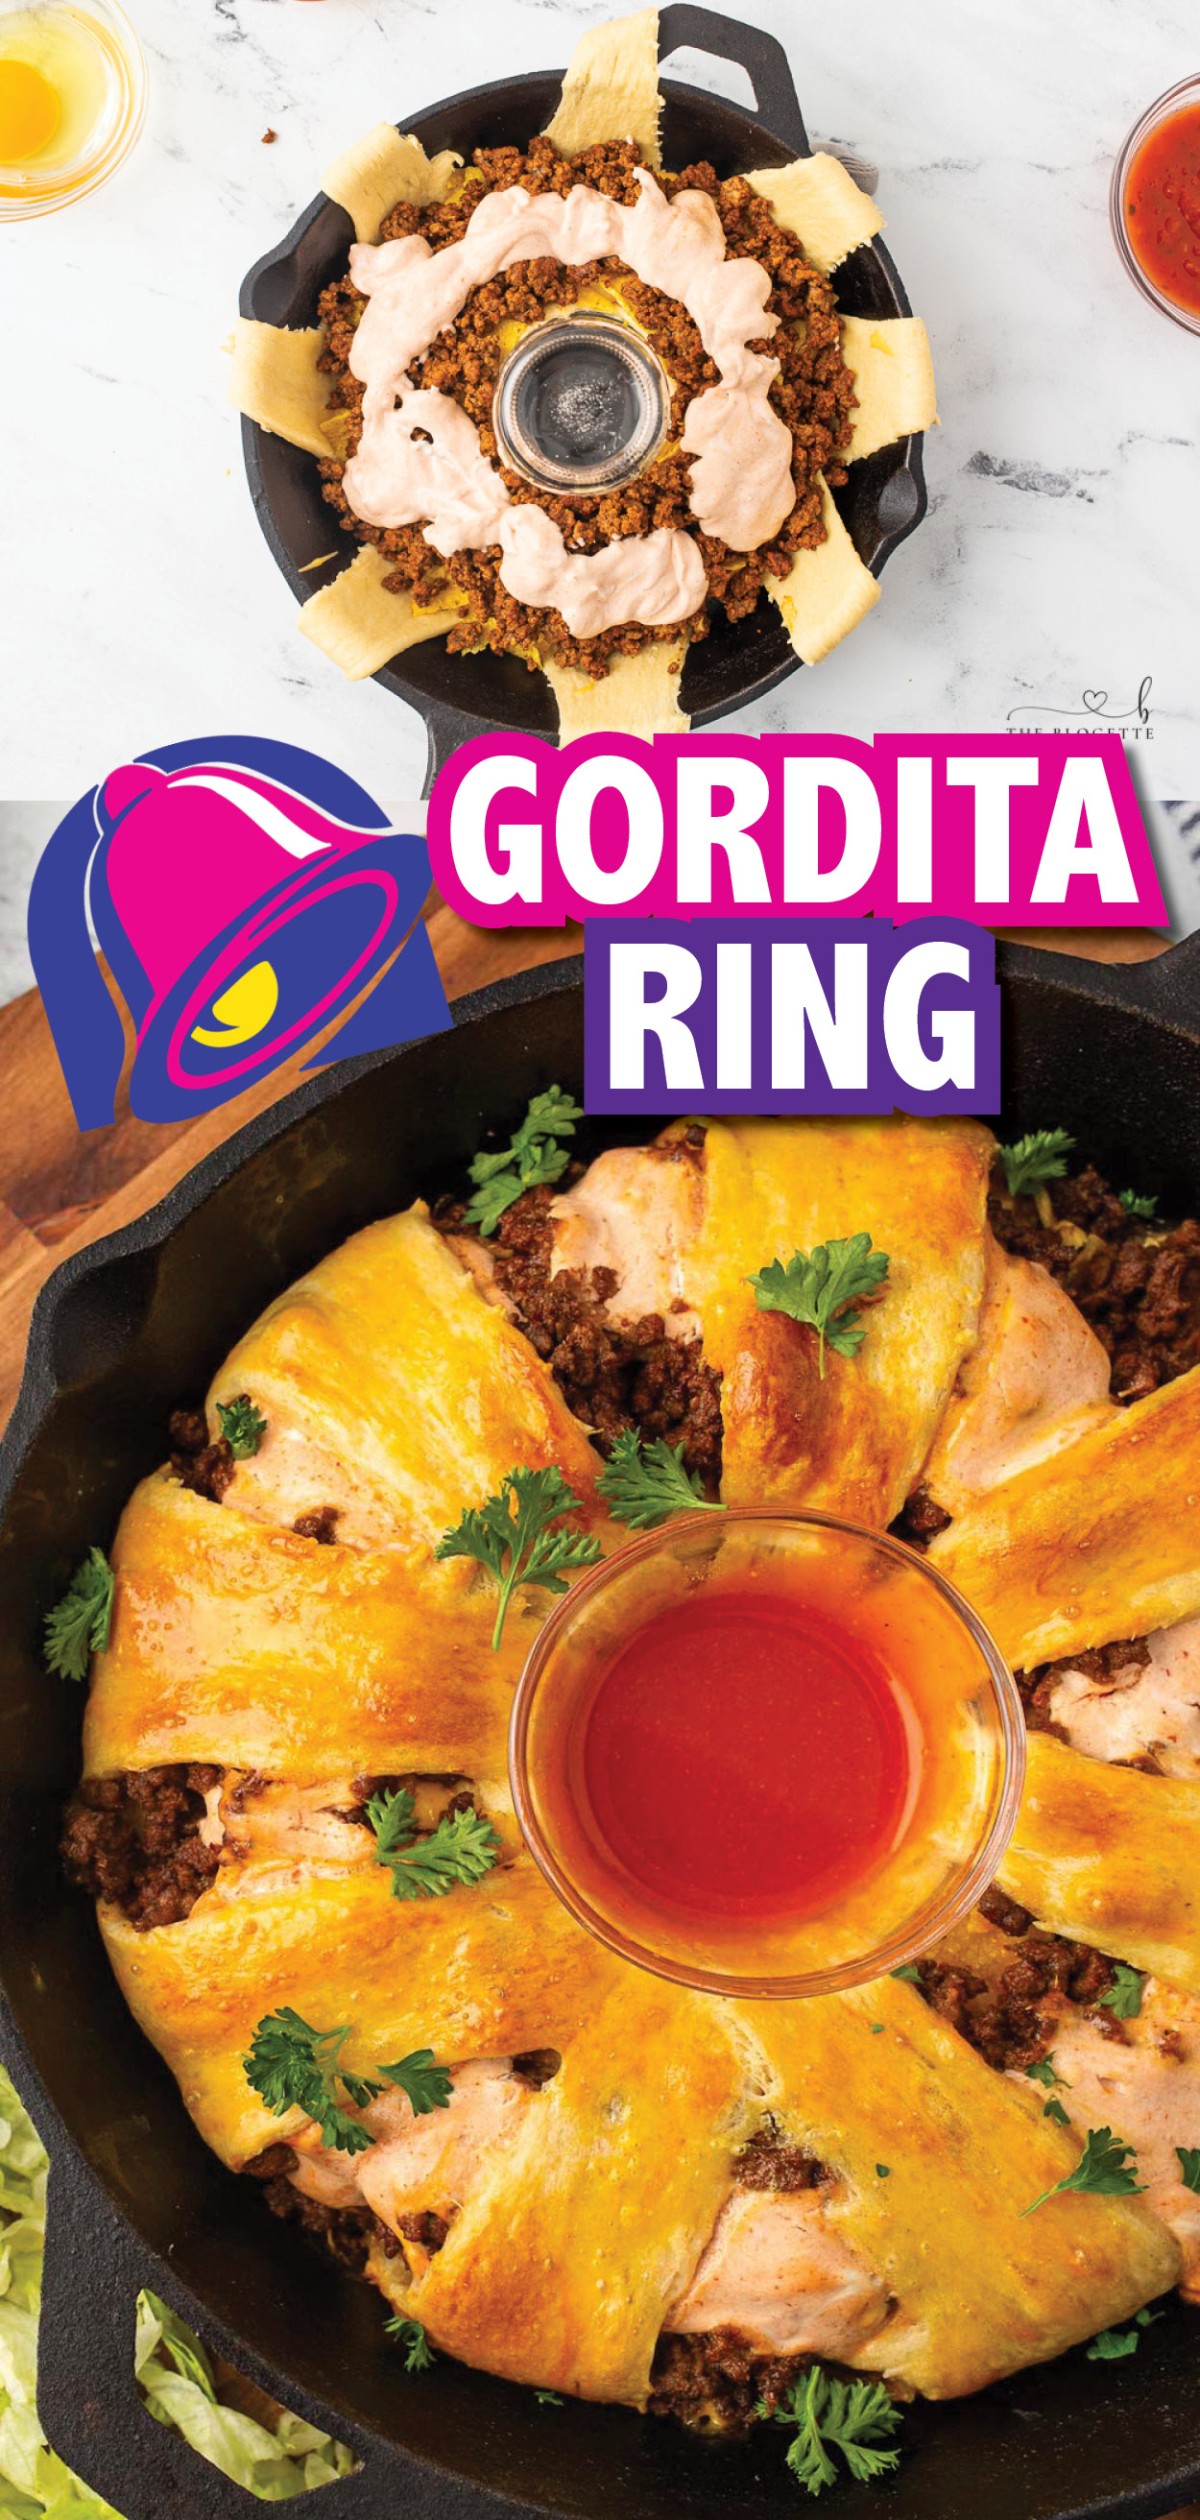 How to Make a Taco Bell Gordita Ring